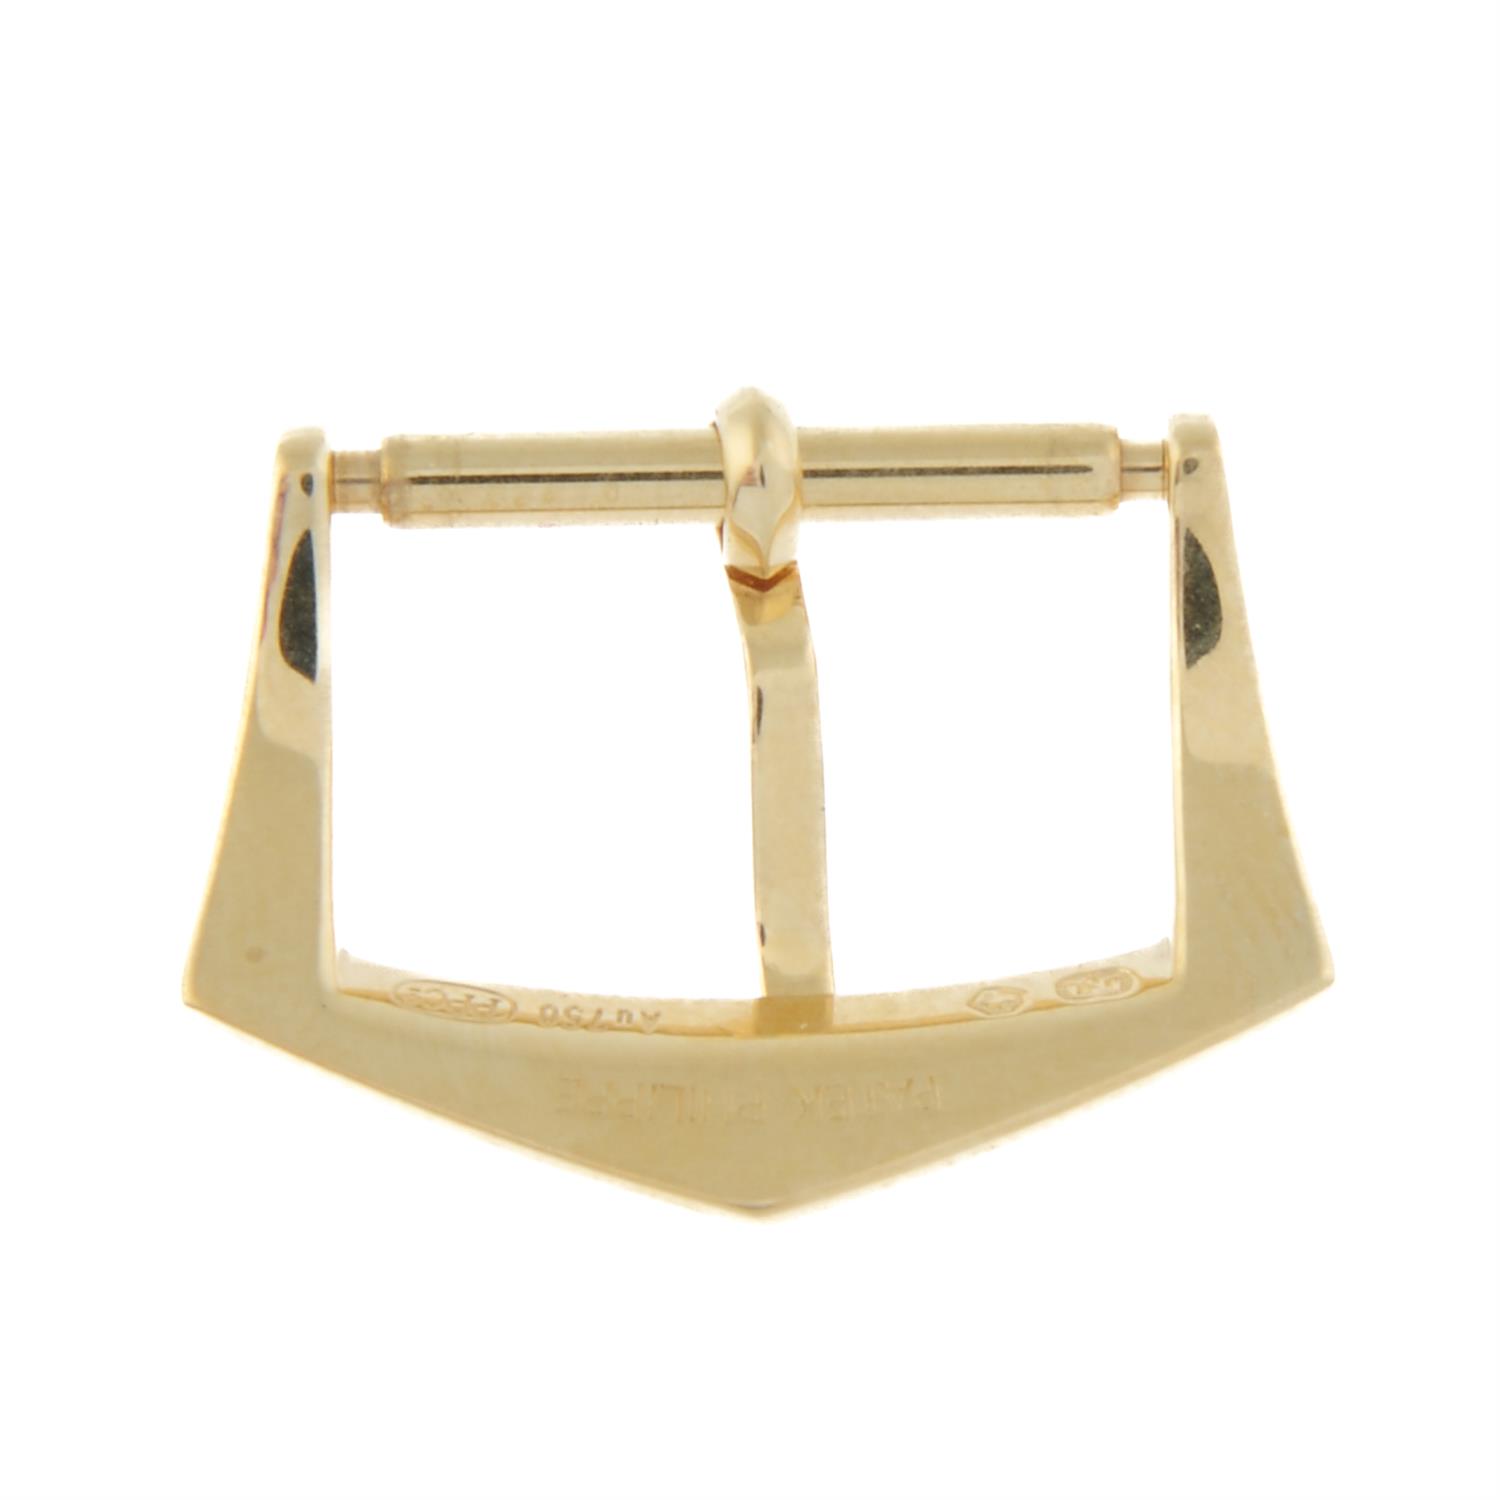 Patek Philippe - an 18ct yellow gold pin buckle. - Image 2 of 2